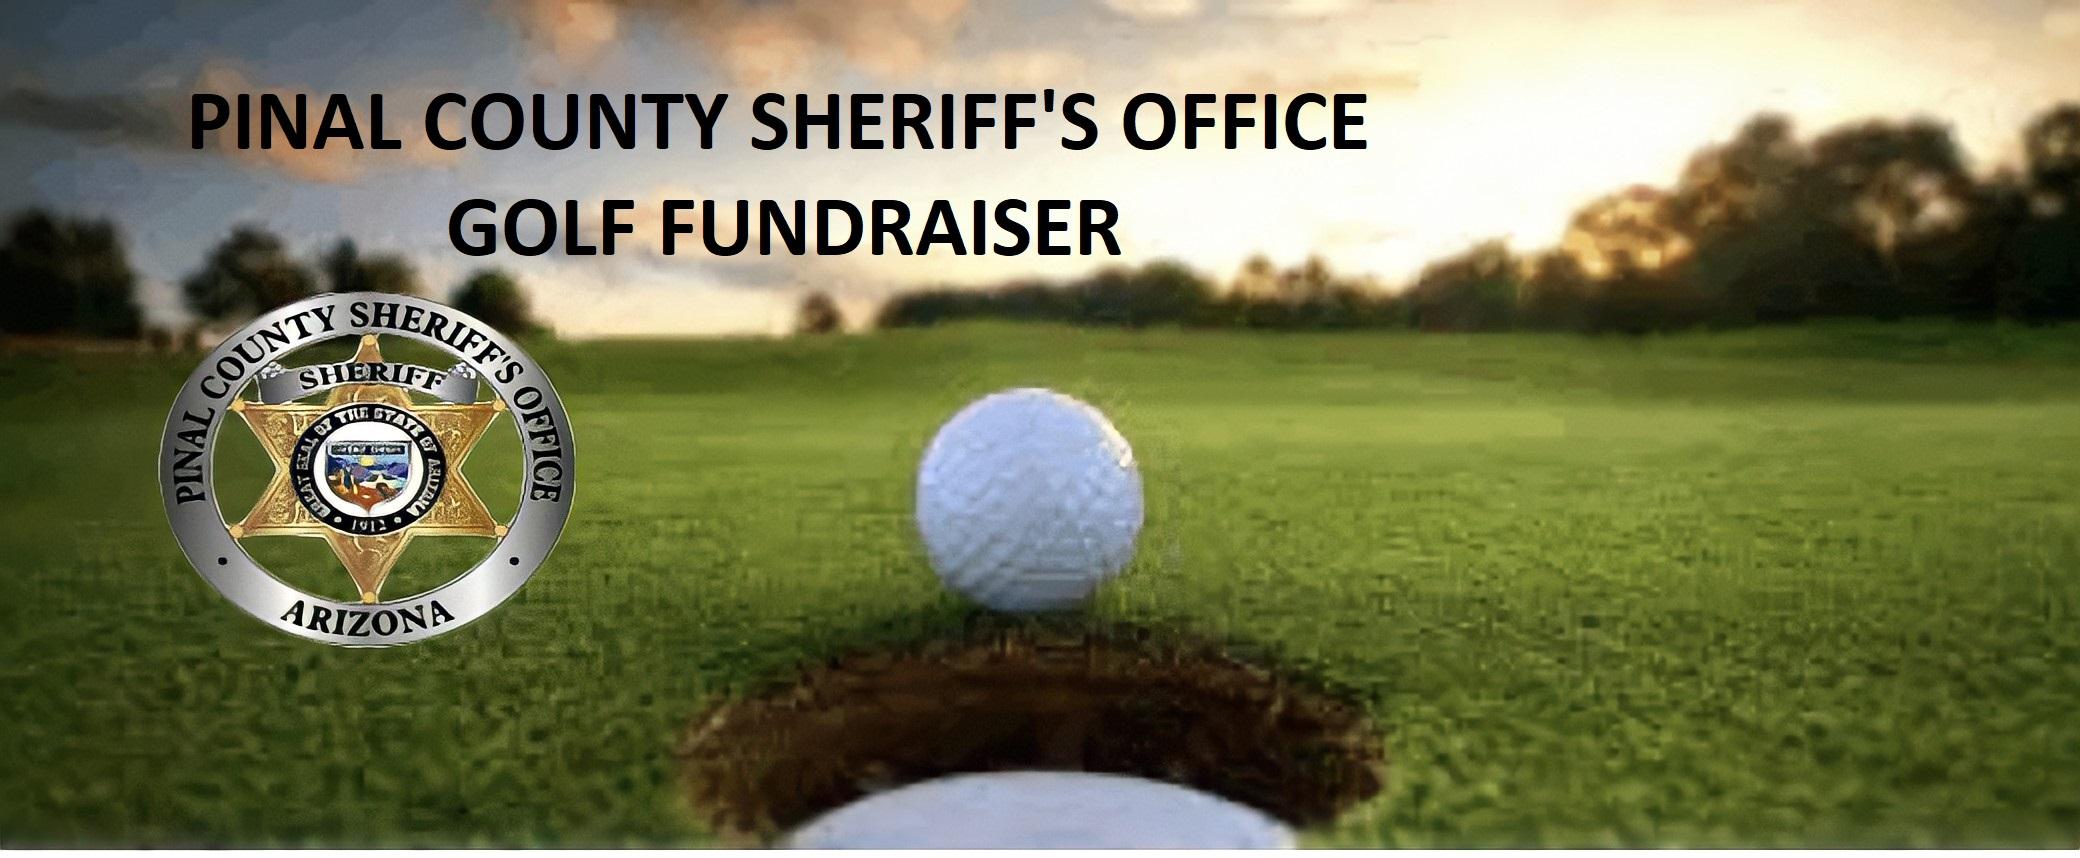 Pinal County Sheriff's Office Golf Fundraiser